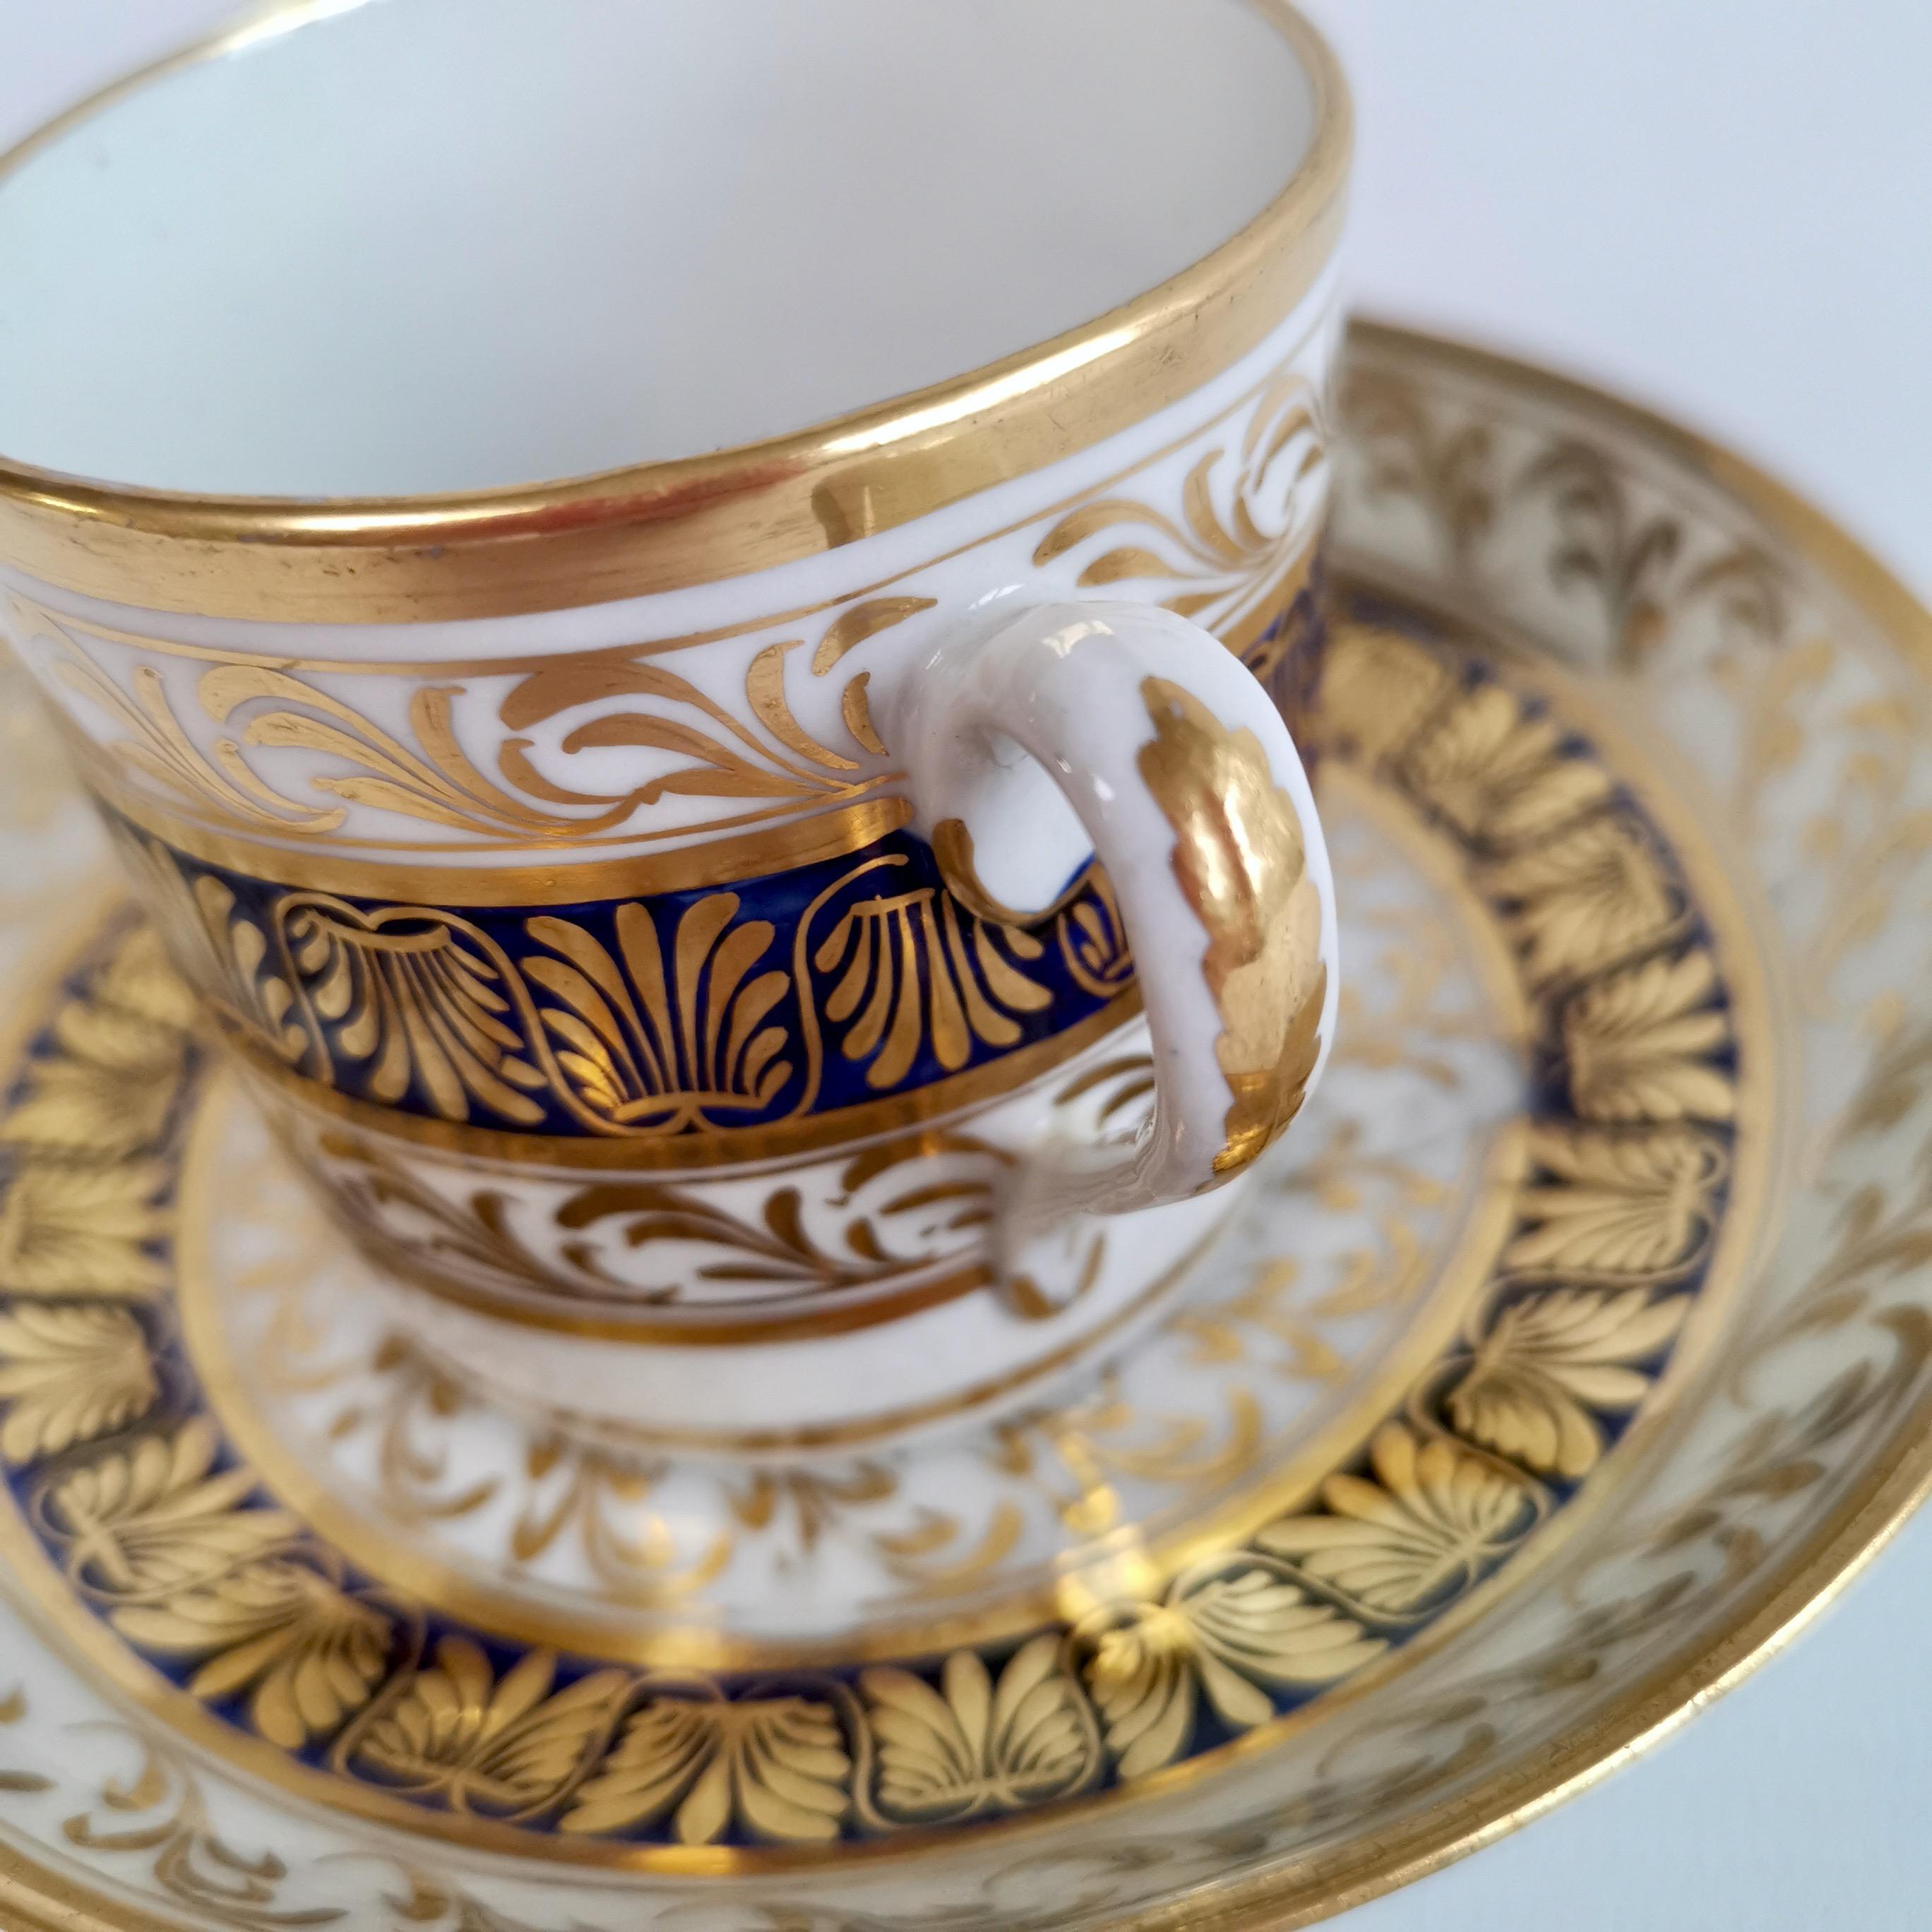 New Hall Porcelain Coffee Can and Saucer, Regency Pattern Blue and Gilt, ca 1810 1